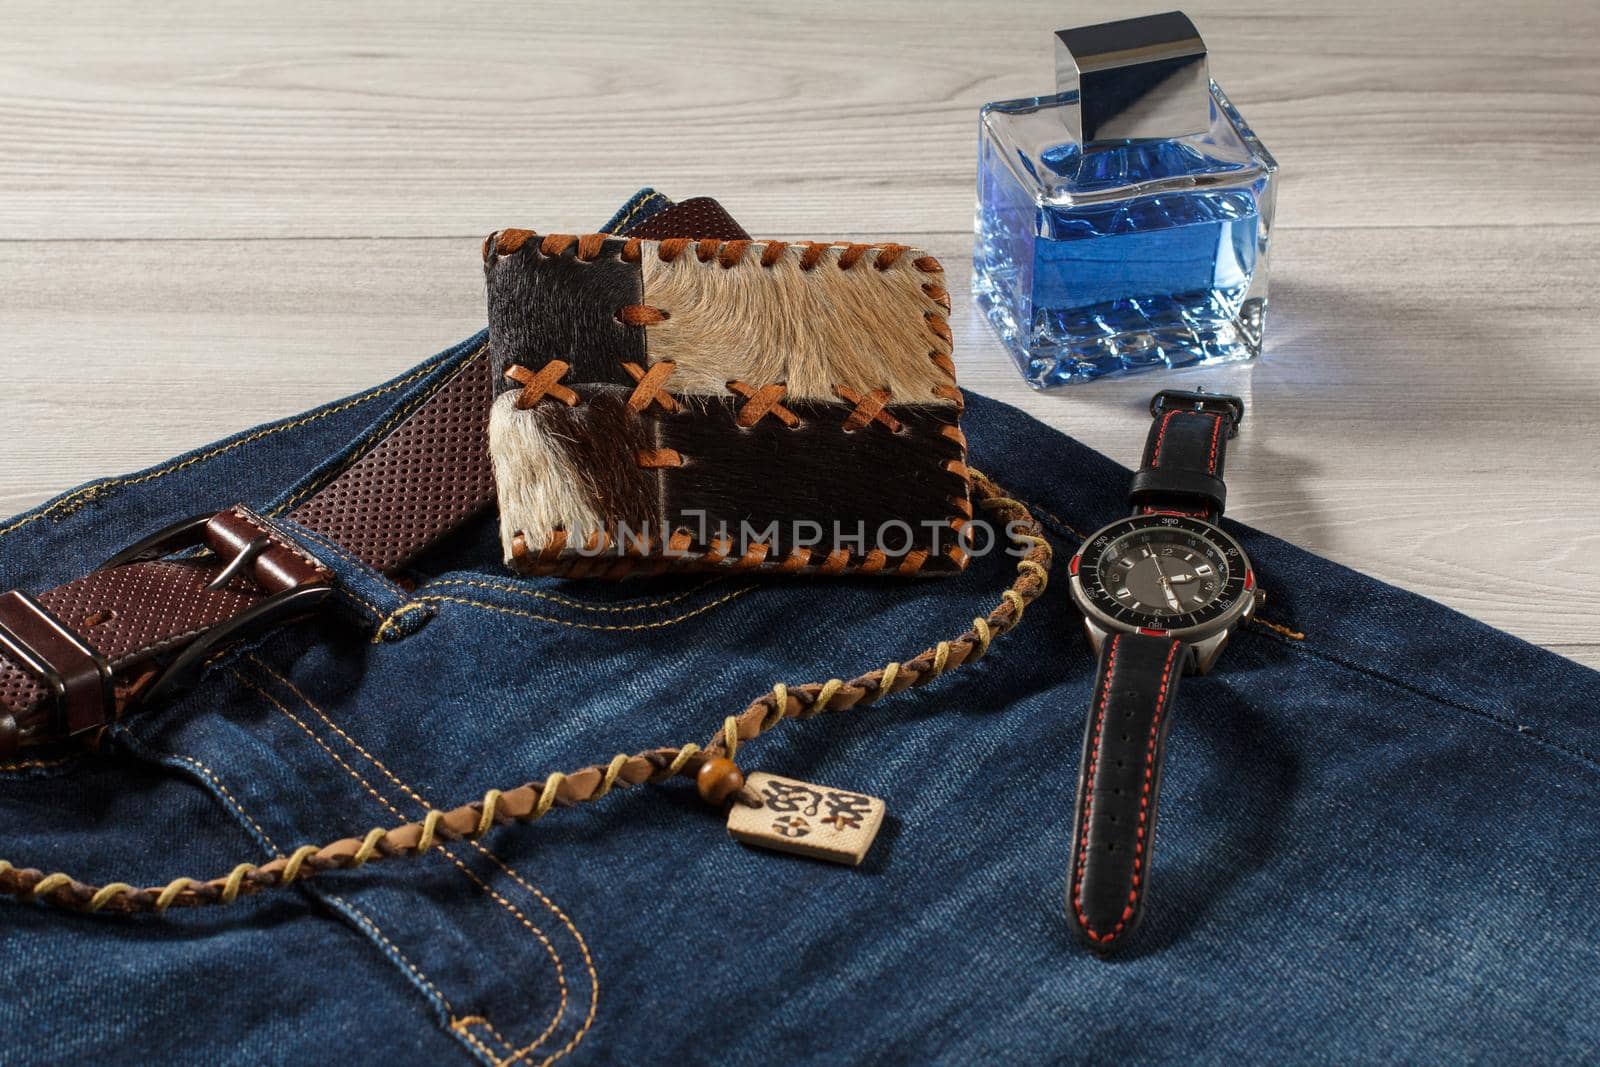 Man perfume, watch with a leather strap, jeans with leather belt, leather purse and amulet on a gray wooden background